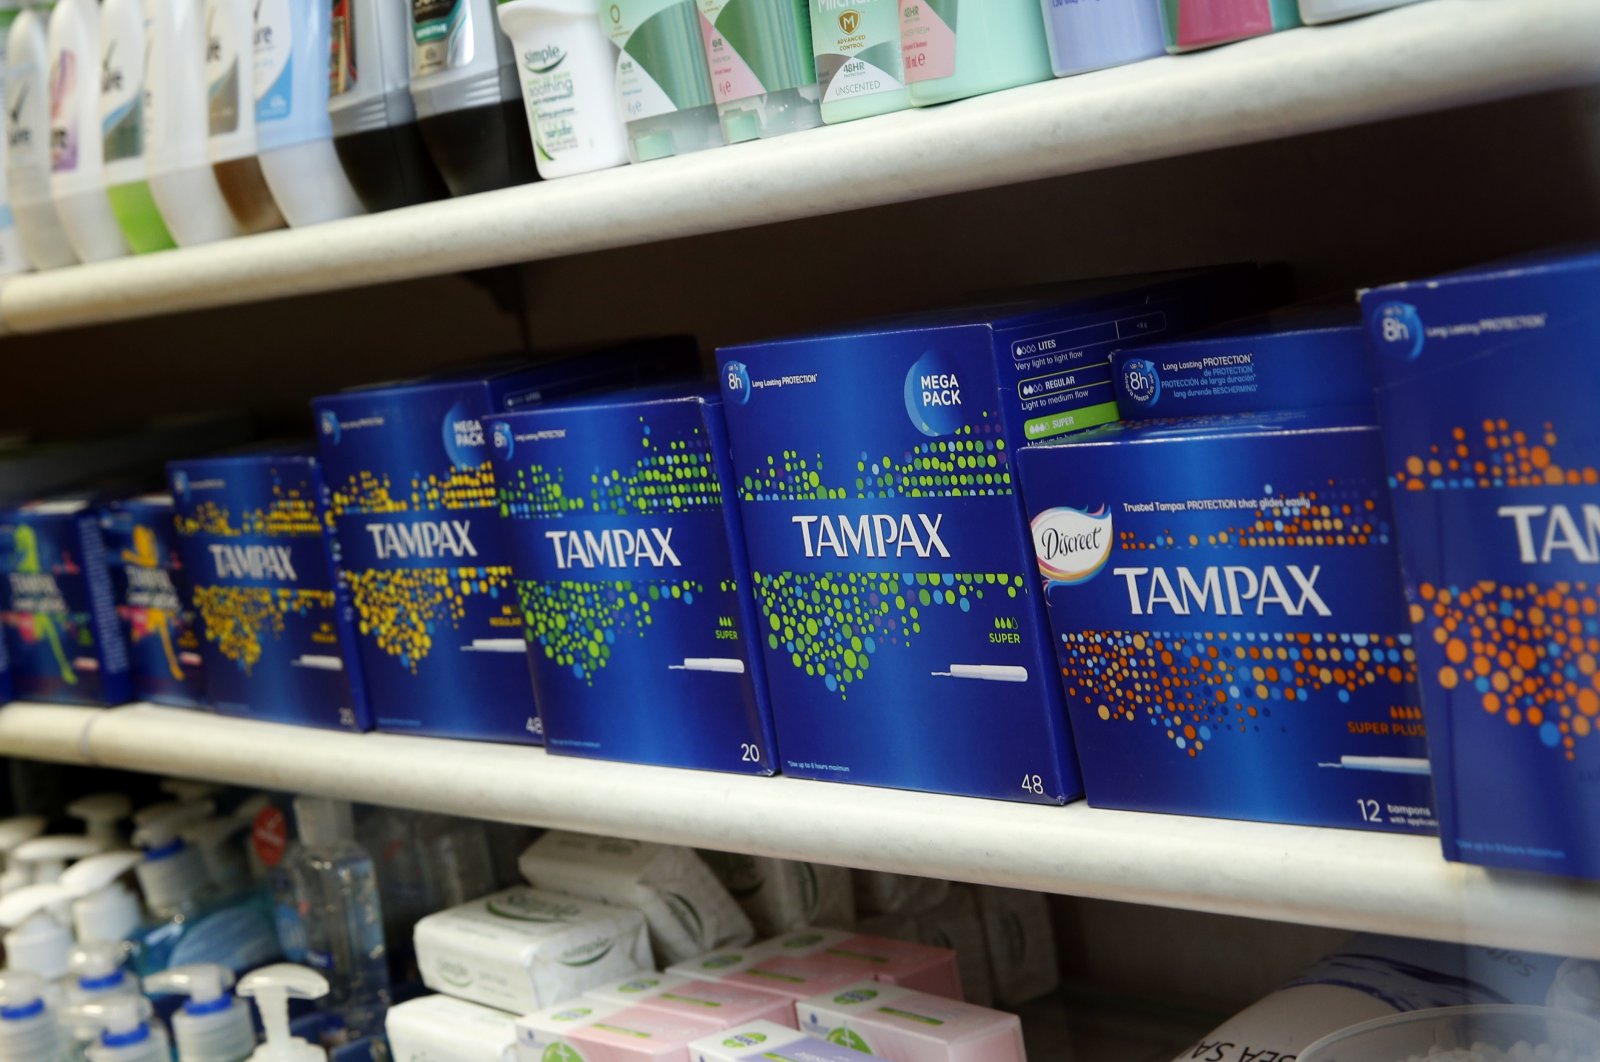 Women's sanitary products on sale at a small pharmacy in London, Friday, March, 18, 2016. (AP Photo)